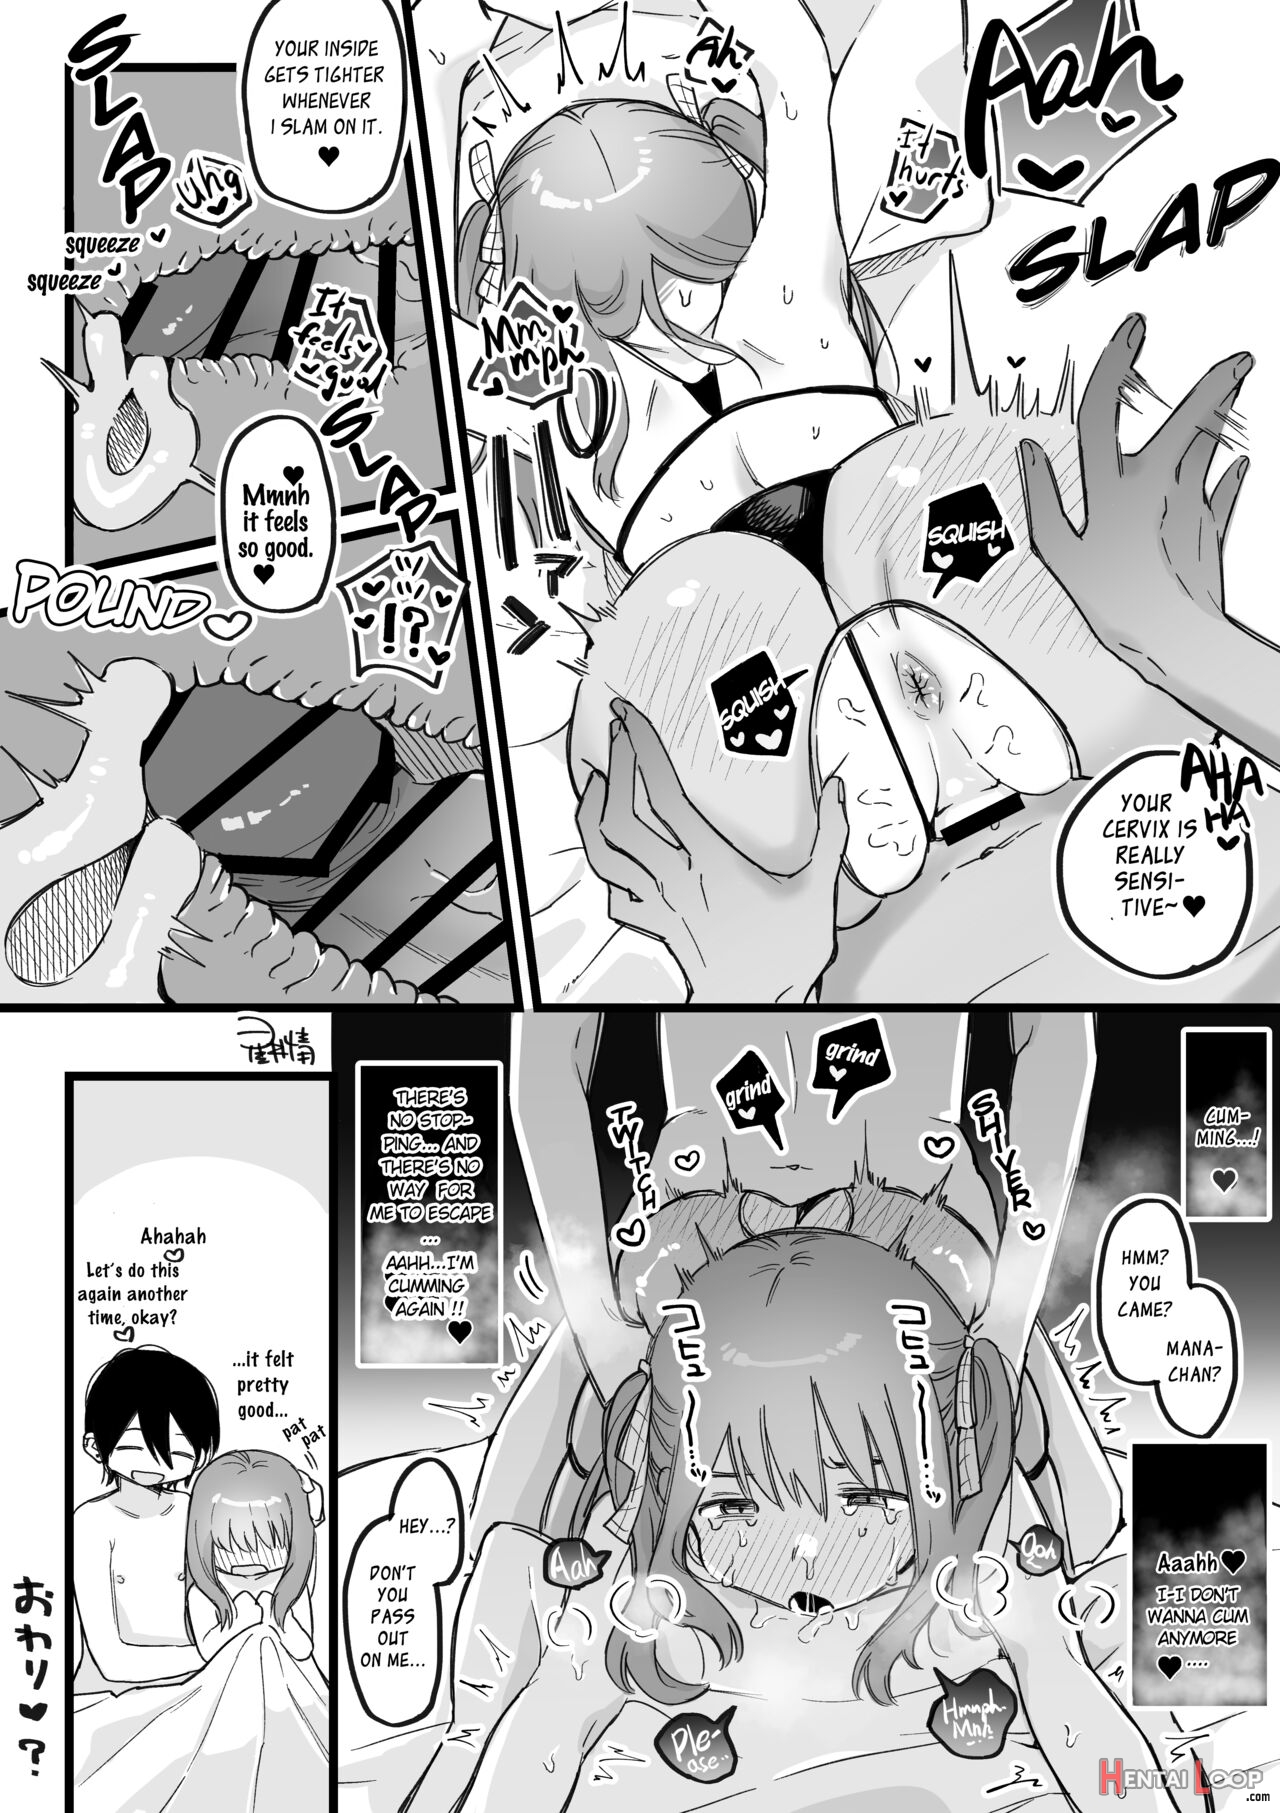 Hime-chan Total Defeat + Hime-chan Returns. page 8